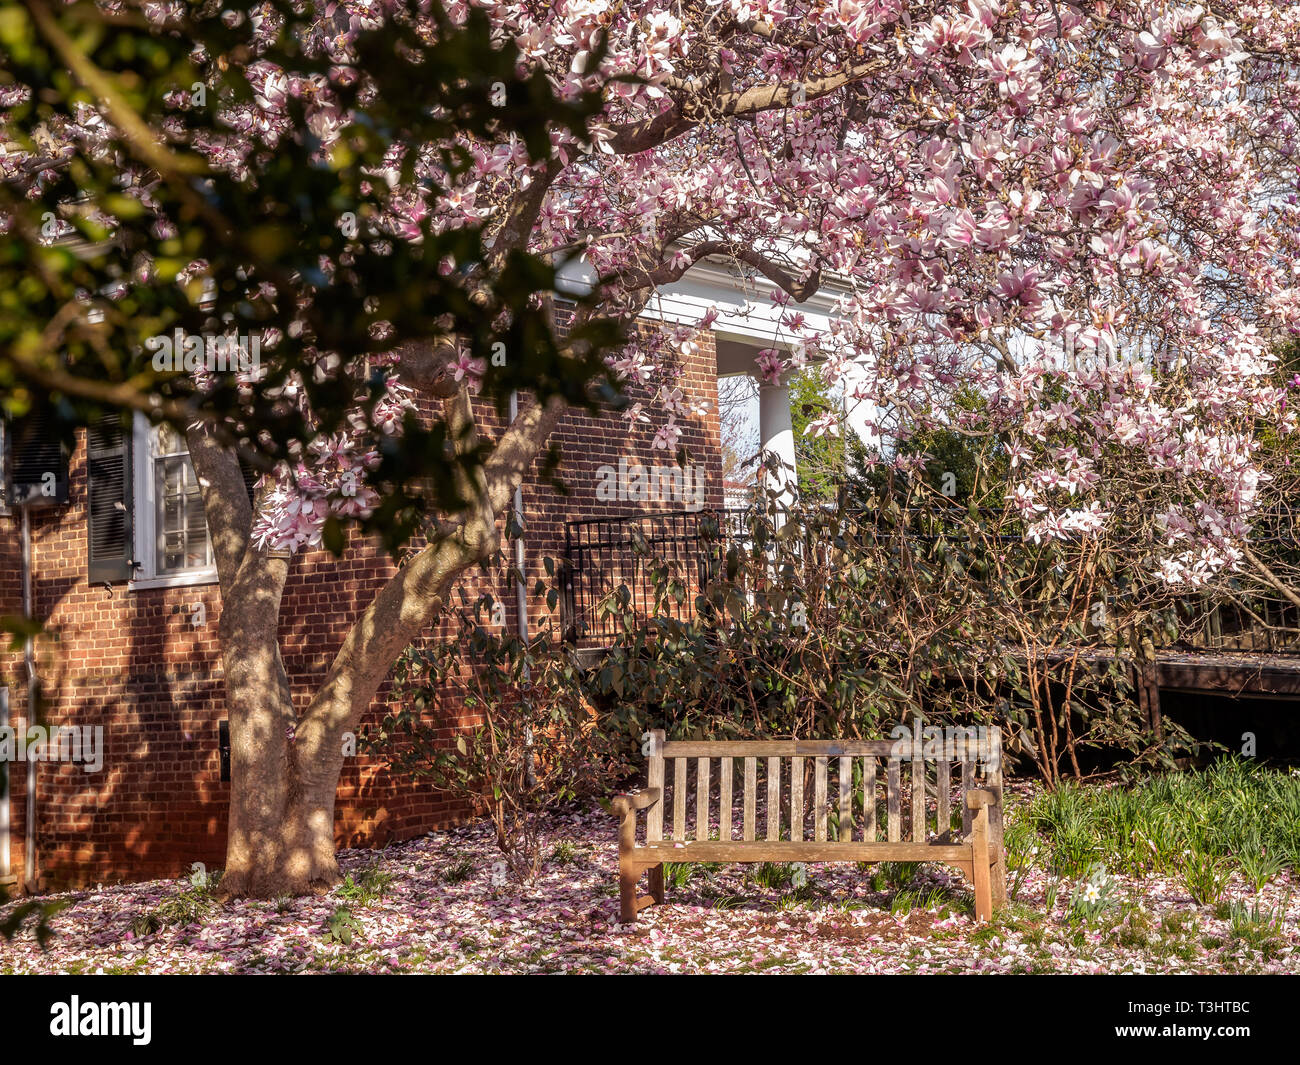 A sitting bench for relaxing in park covered around by pink flowers during springtime Stock Photo